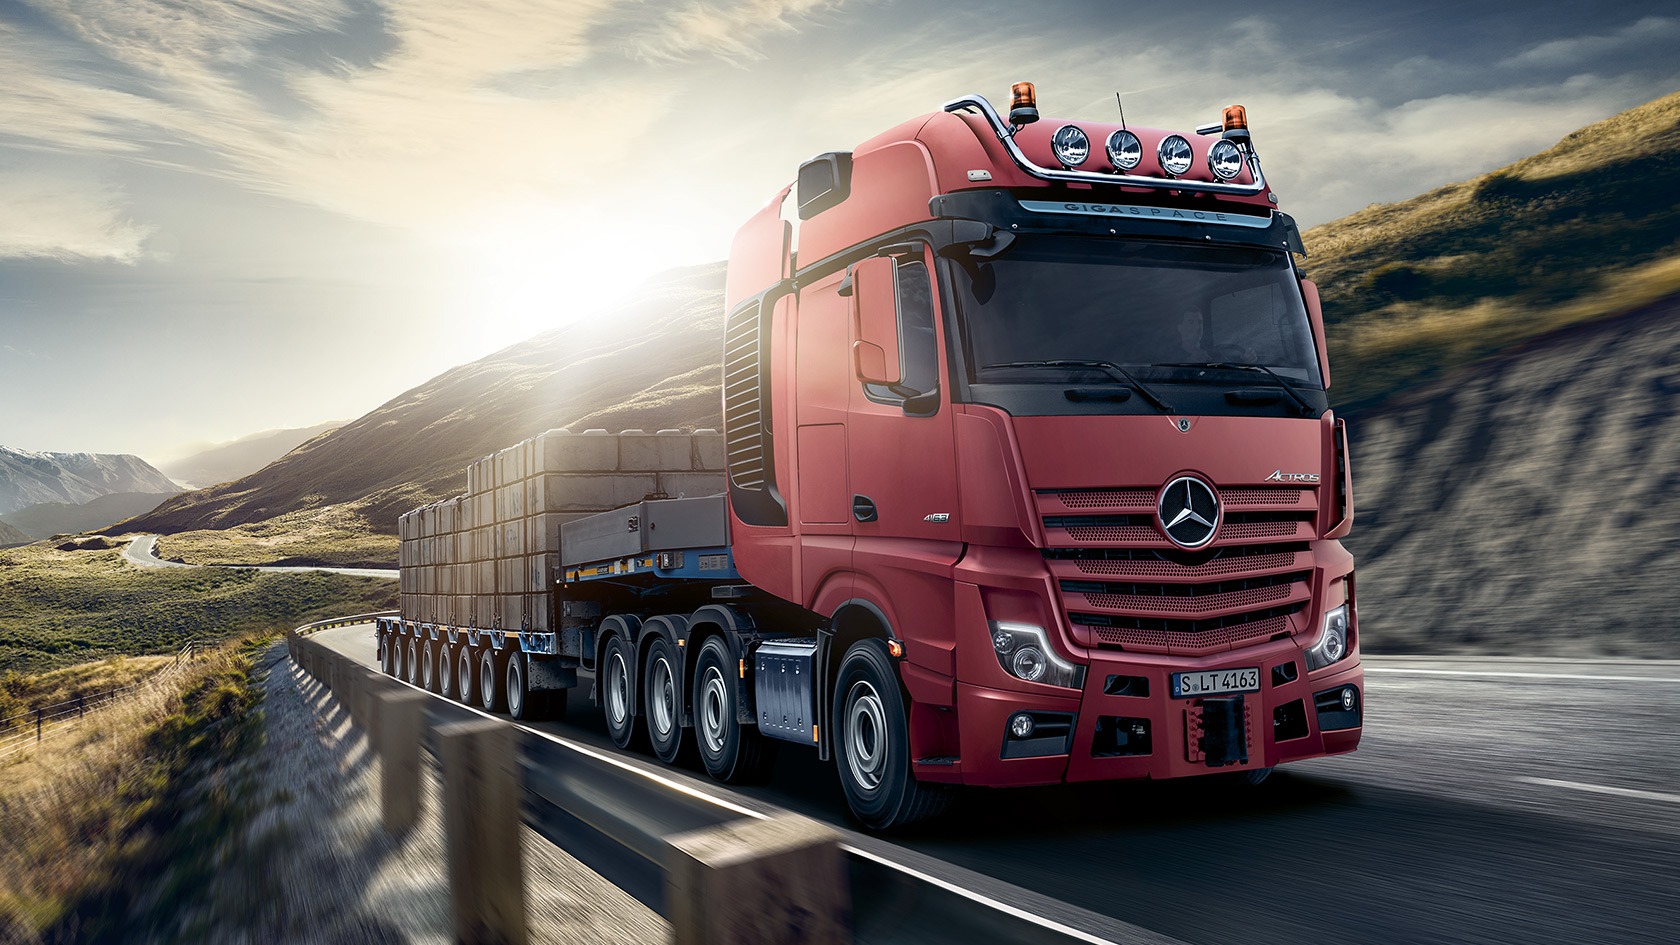 Mercedes Actros MP5 - The latest generation truck with